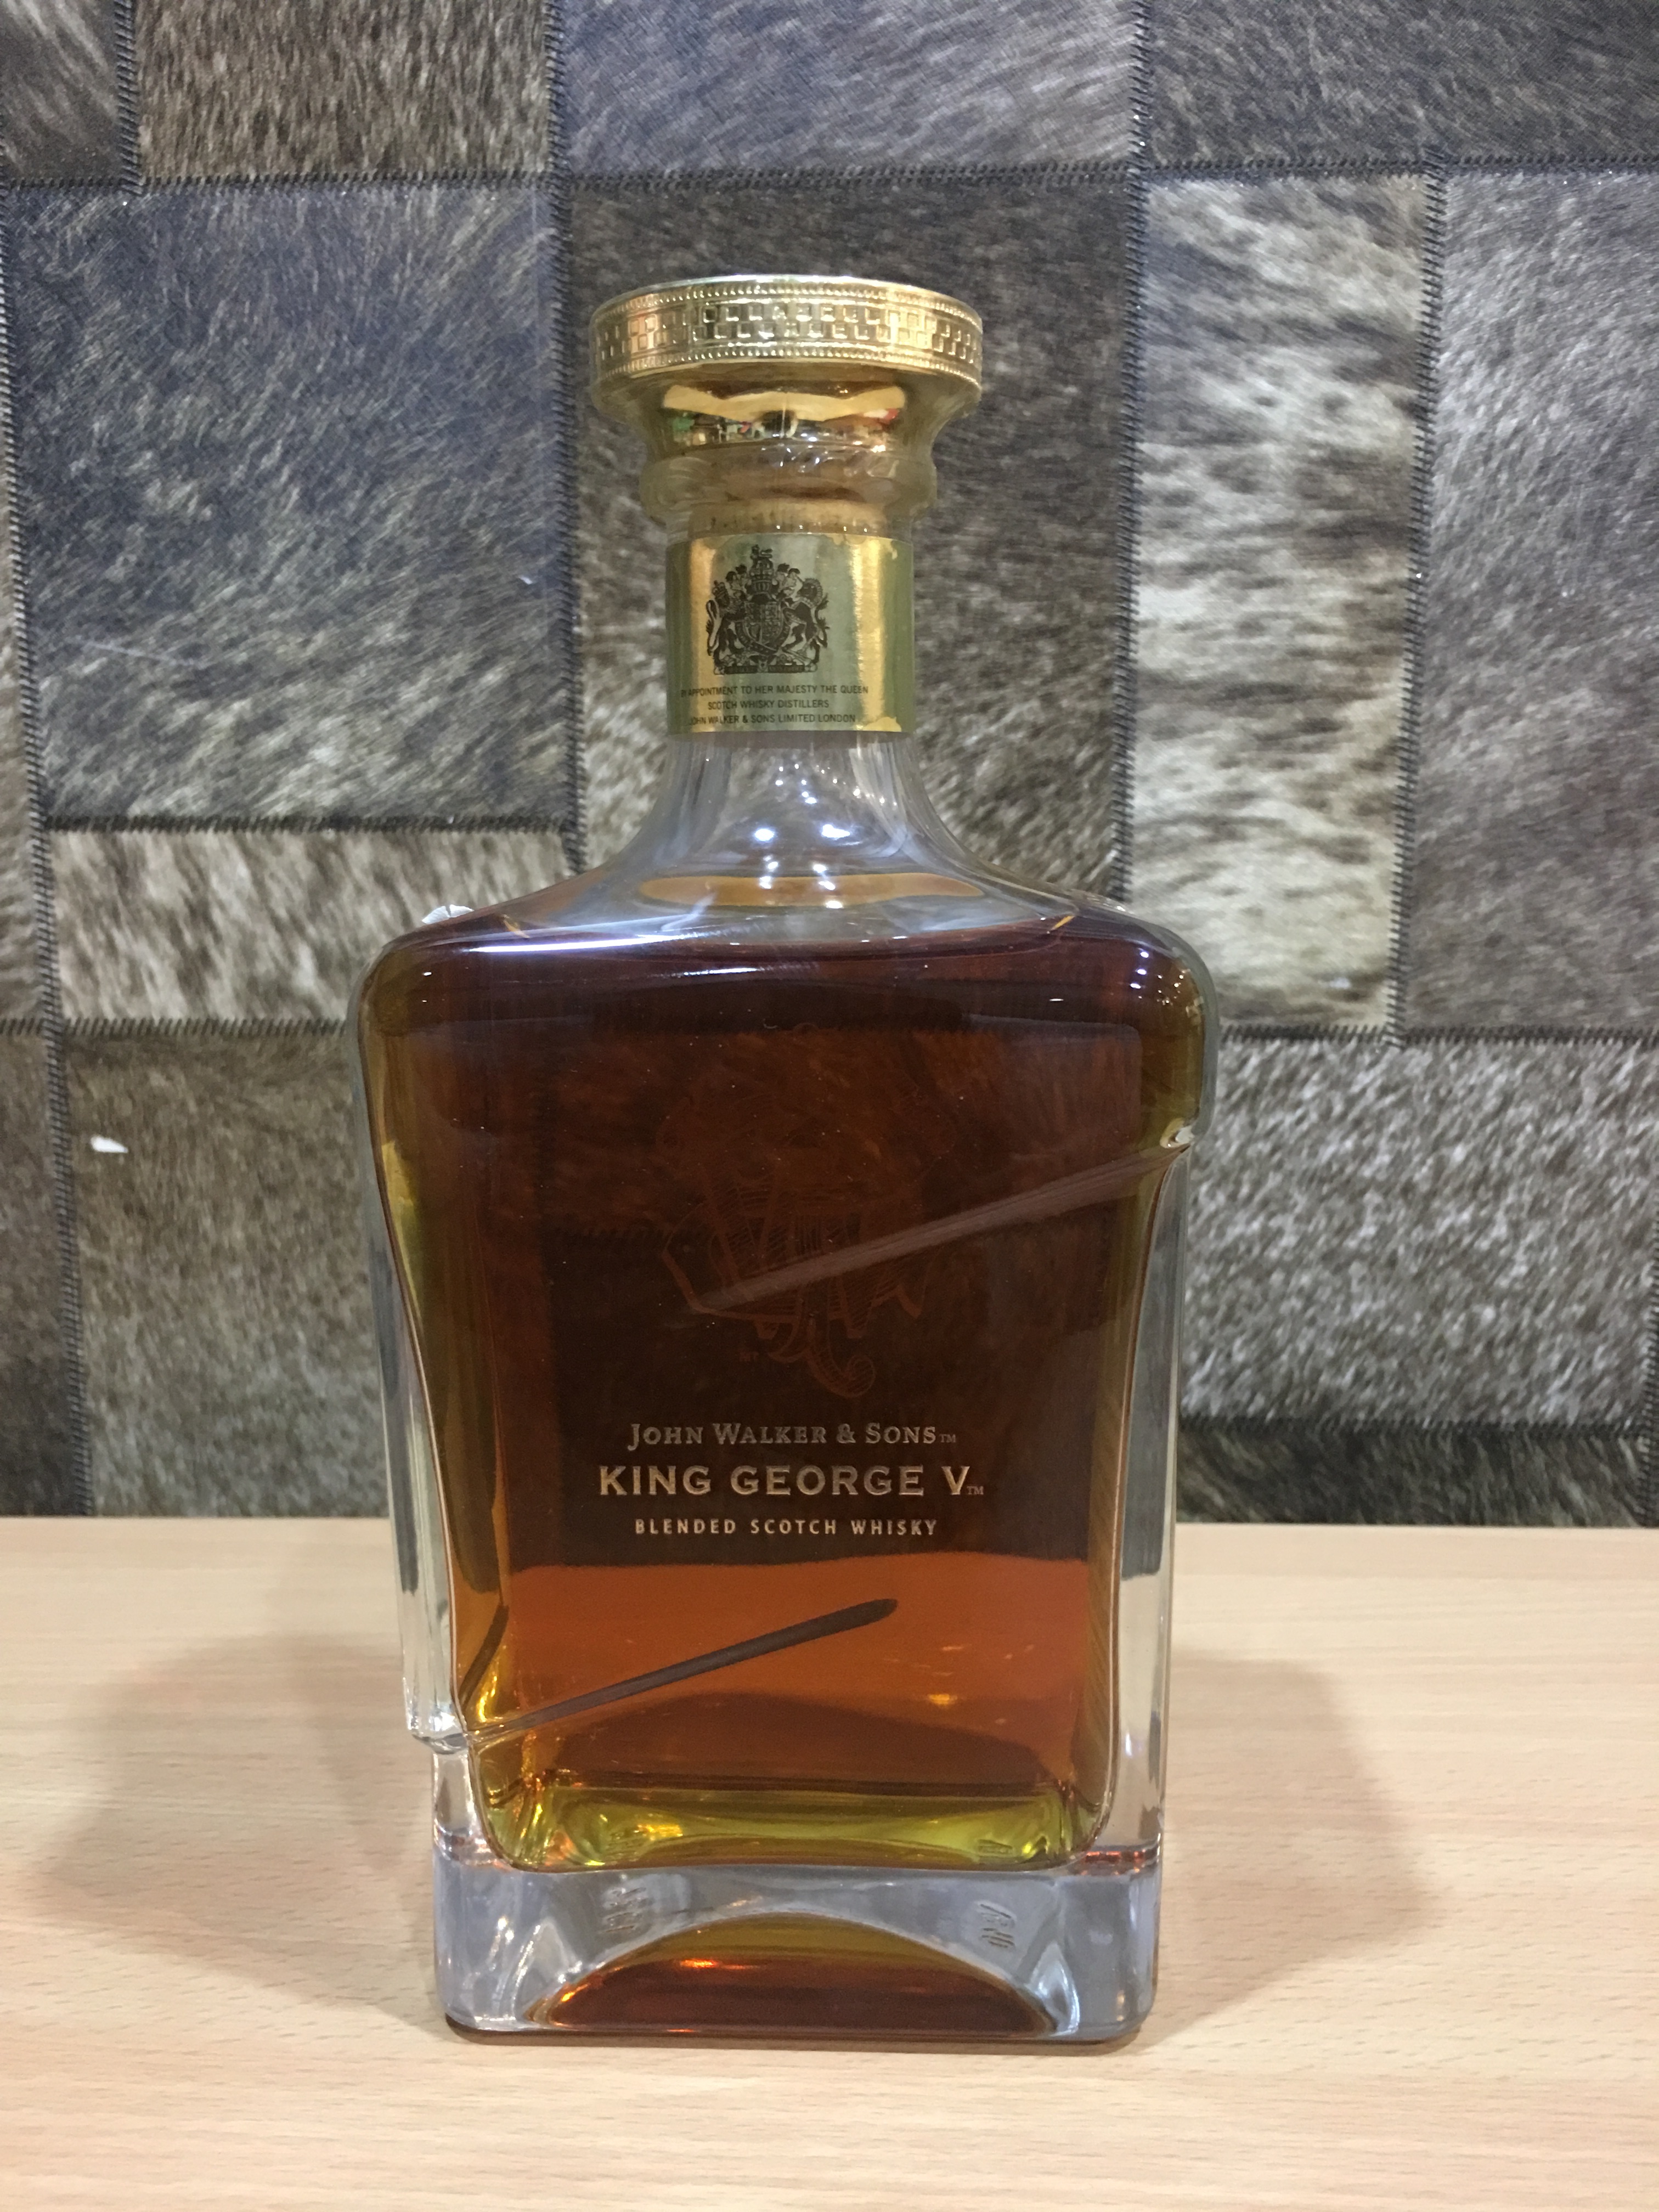 Johnnie Walker King George V Blended Scotch Whisky, 75cl, Acl: 43%